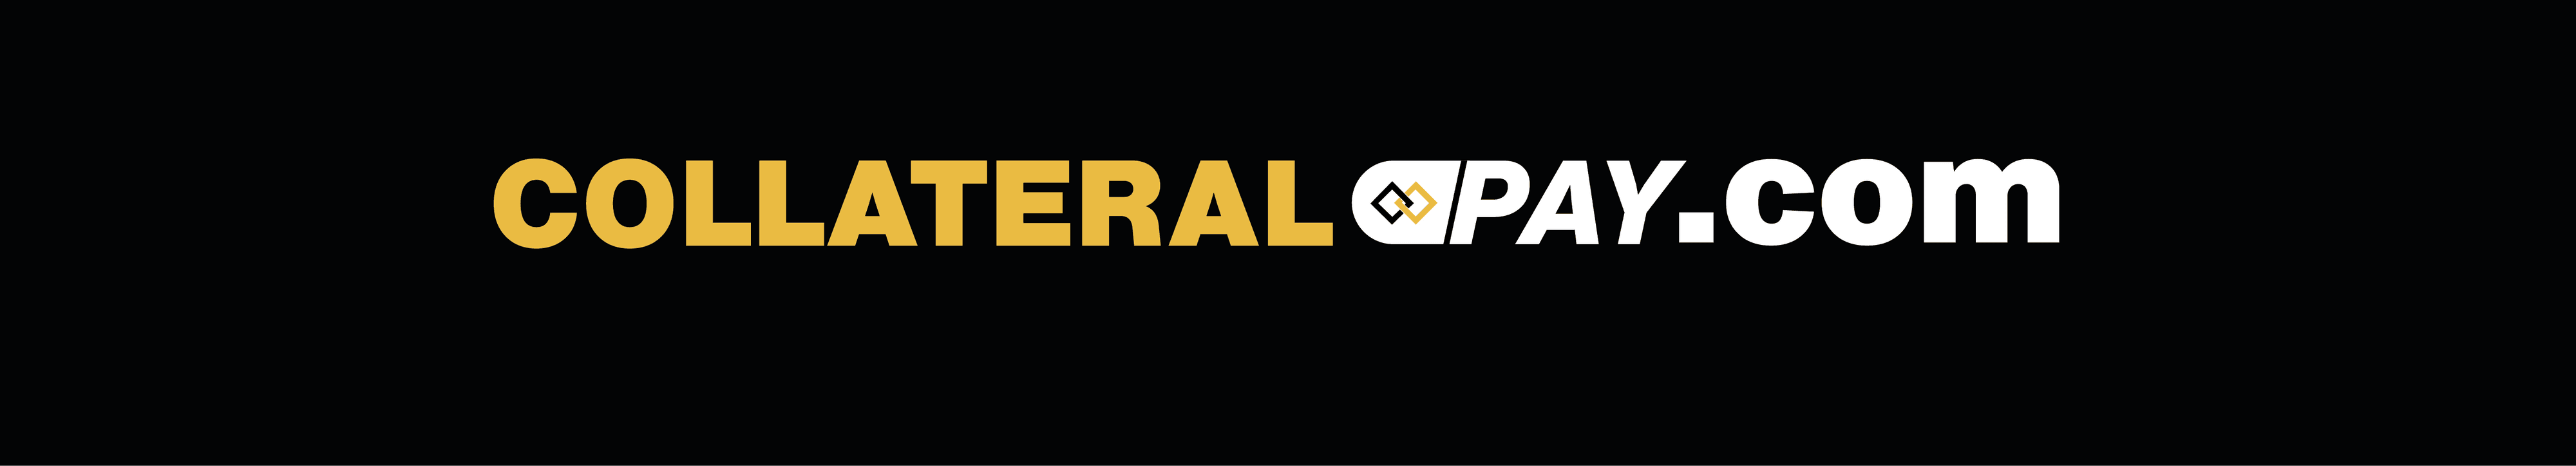 Collateral banner